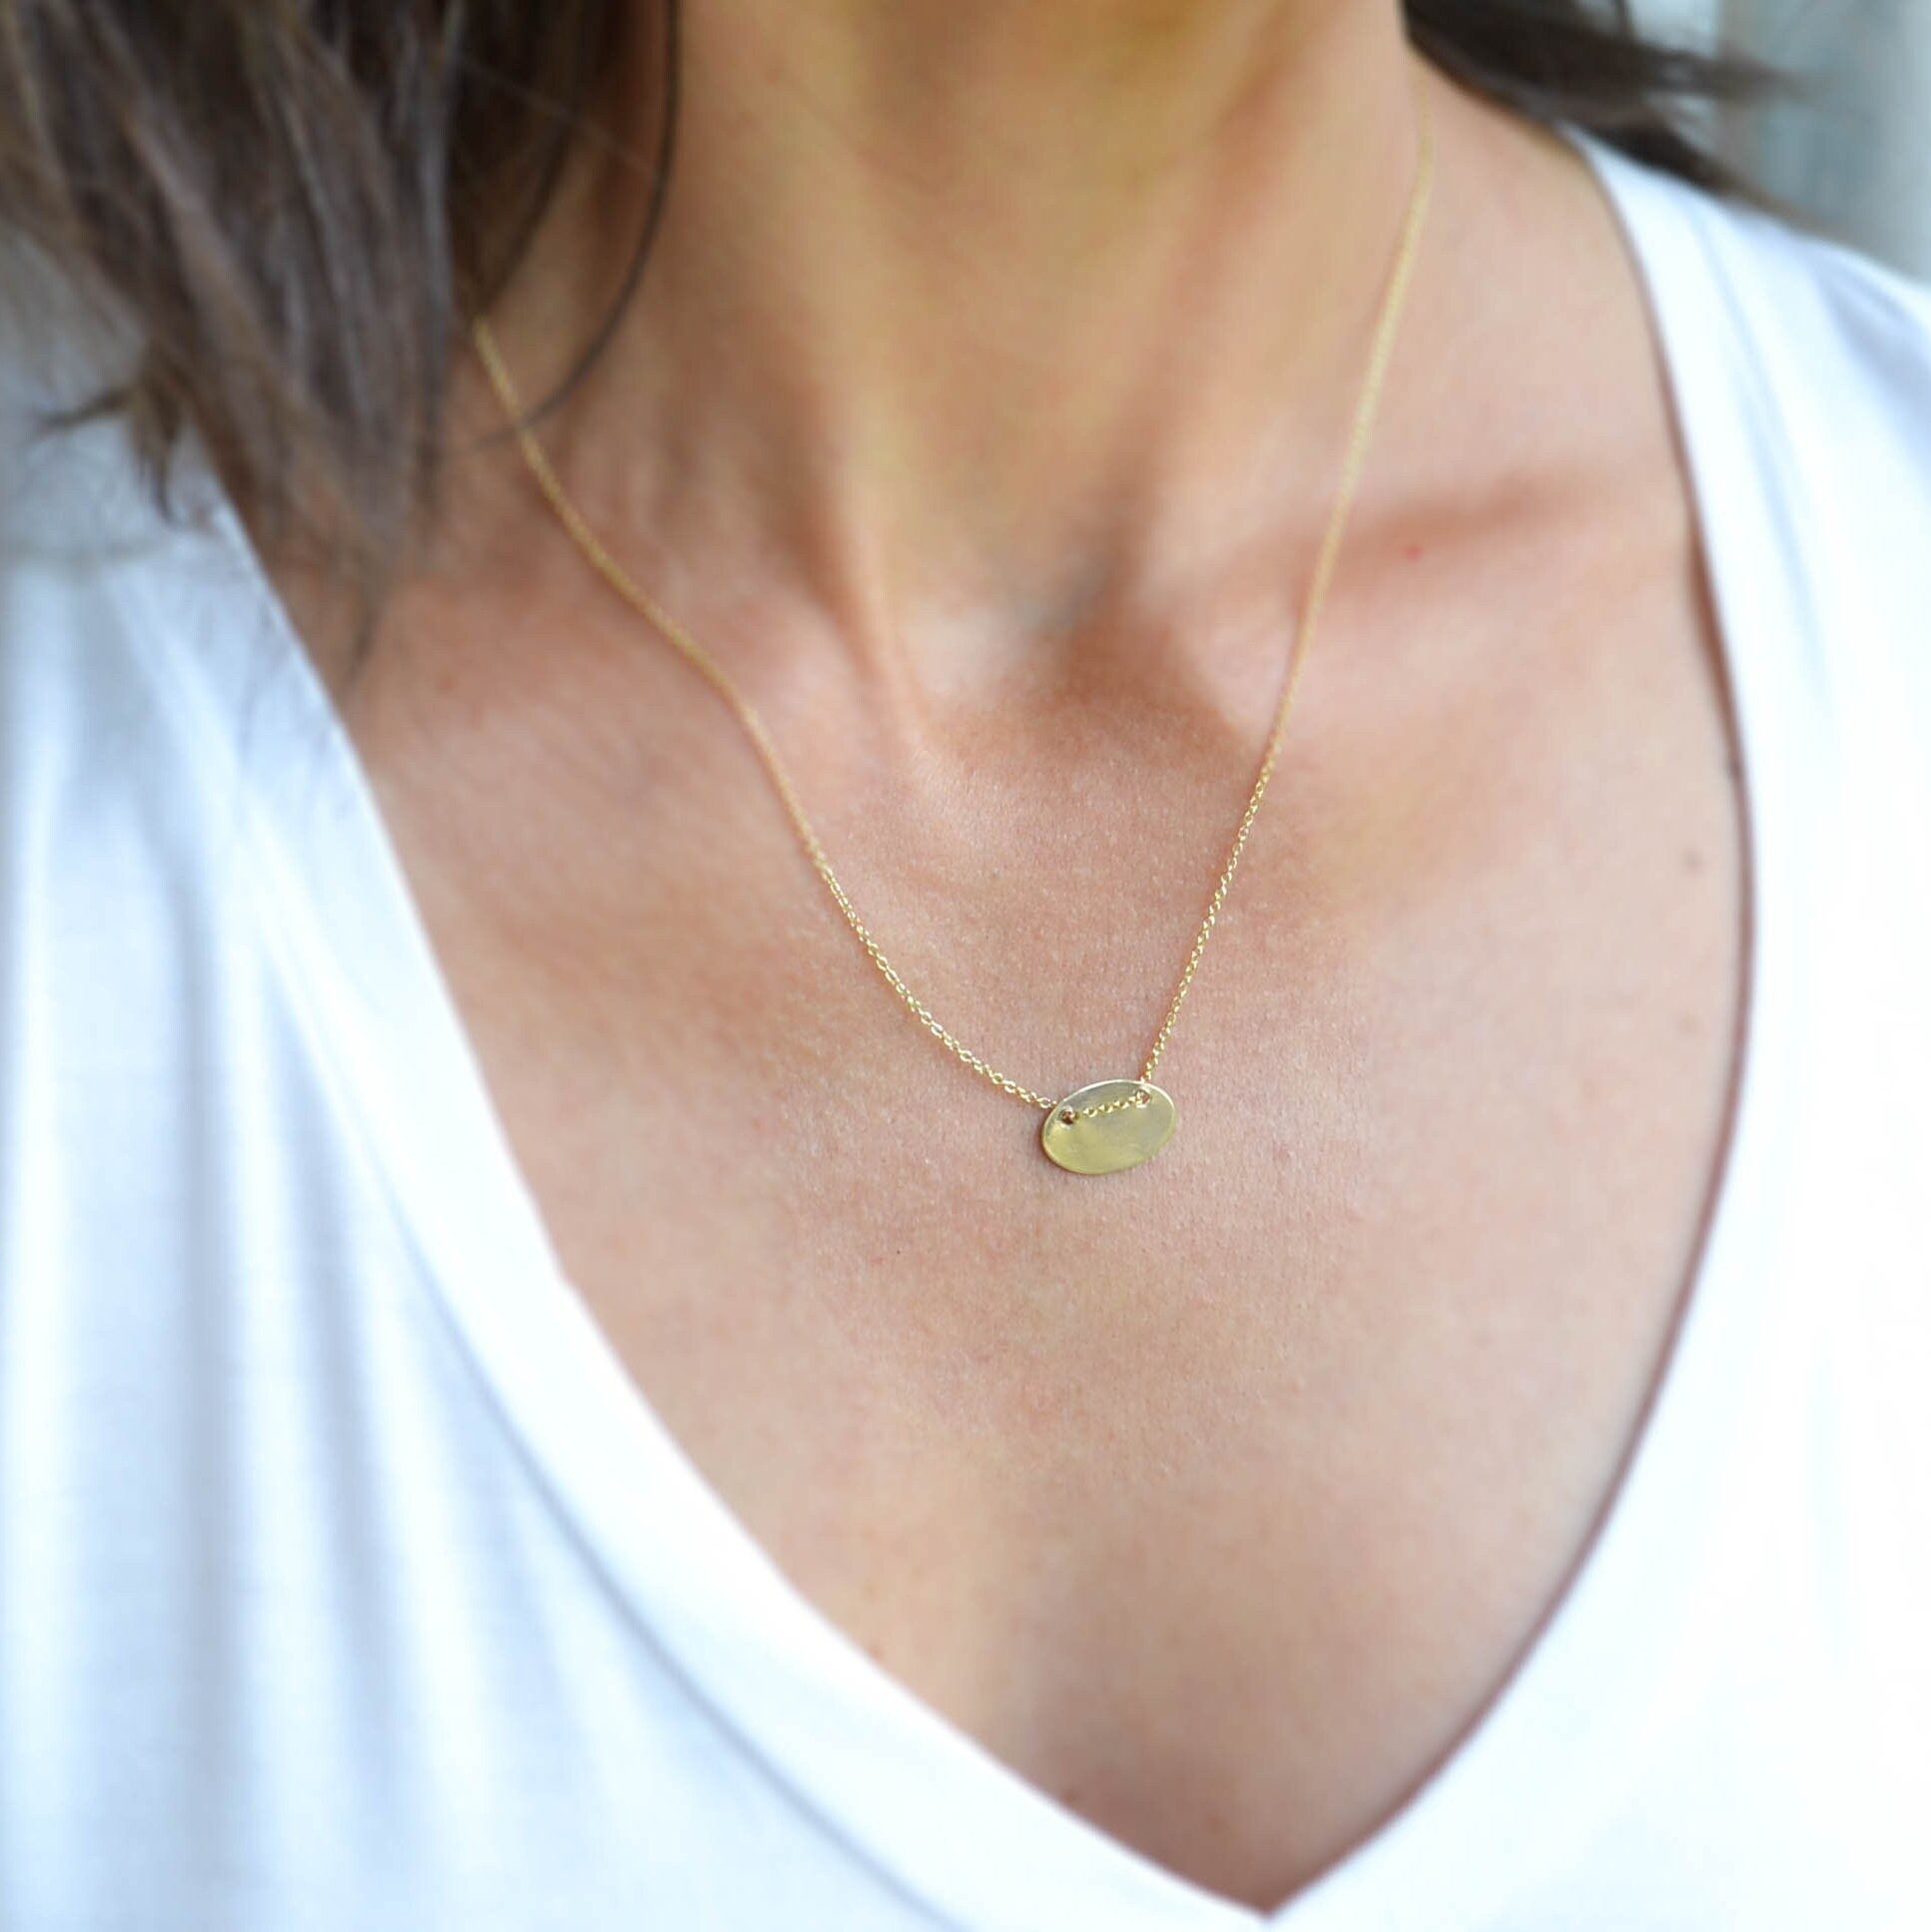 Flat Oval Circle Pendant Necklace in Gold Filled or Sterling Silver, Egg Charm Pendant, Gift Necklace for Her, Valentines Day